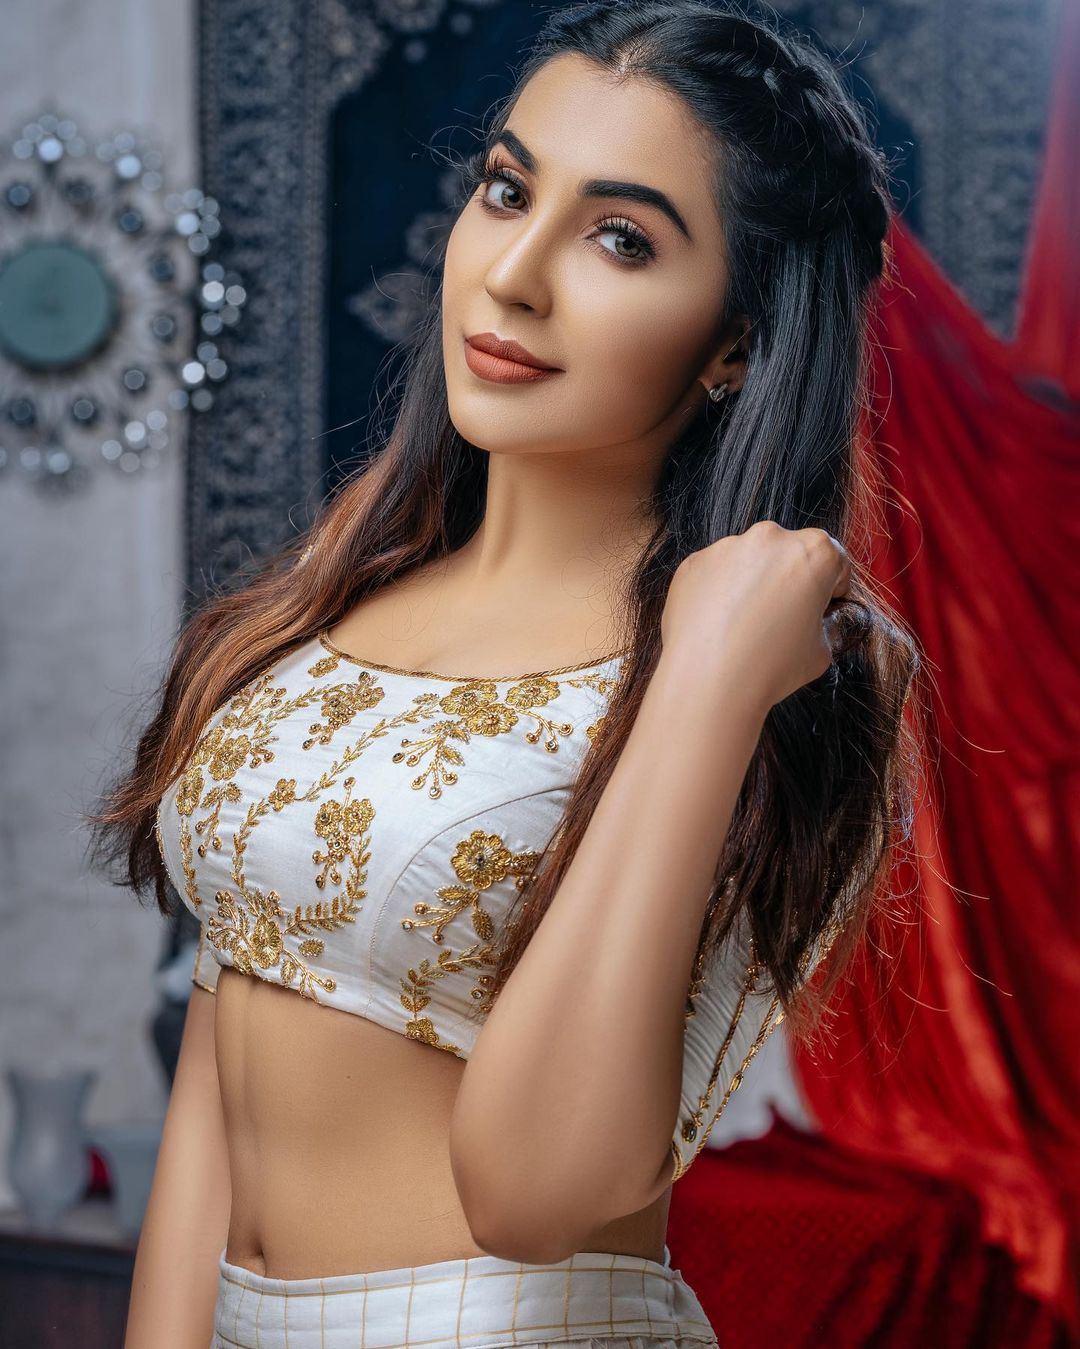 parvati nair hot photos and video on instagram getting viral